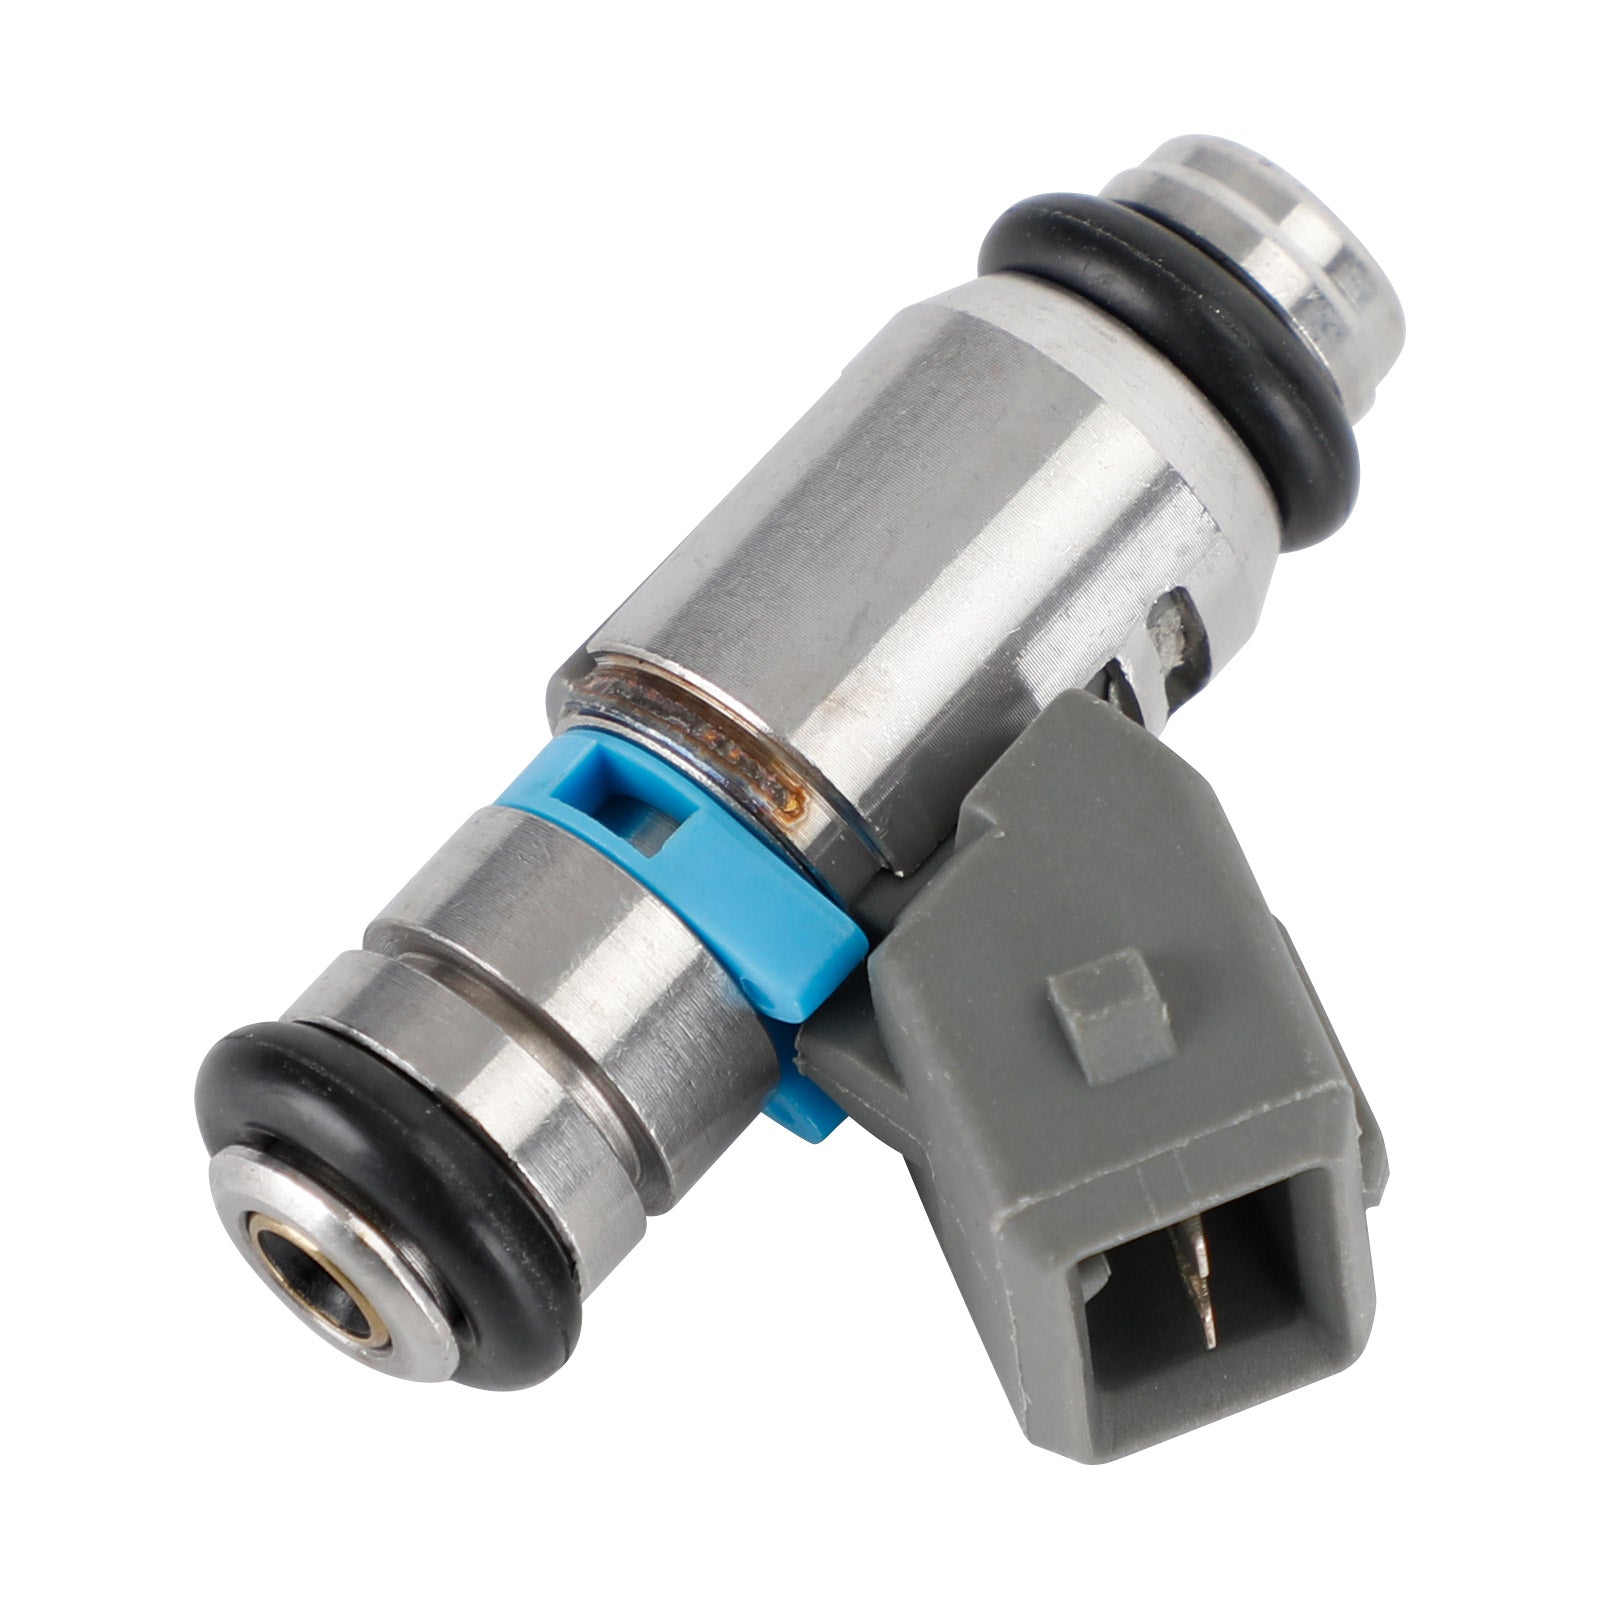 IWP-181 Twin Power 3.8 g/s Fuel Injector Direct For Repl 27706-07/A Generic